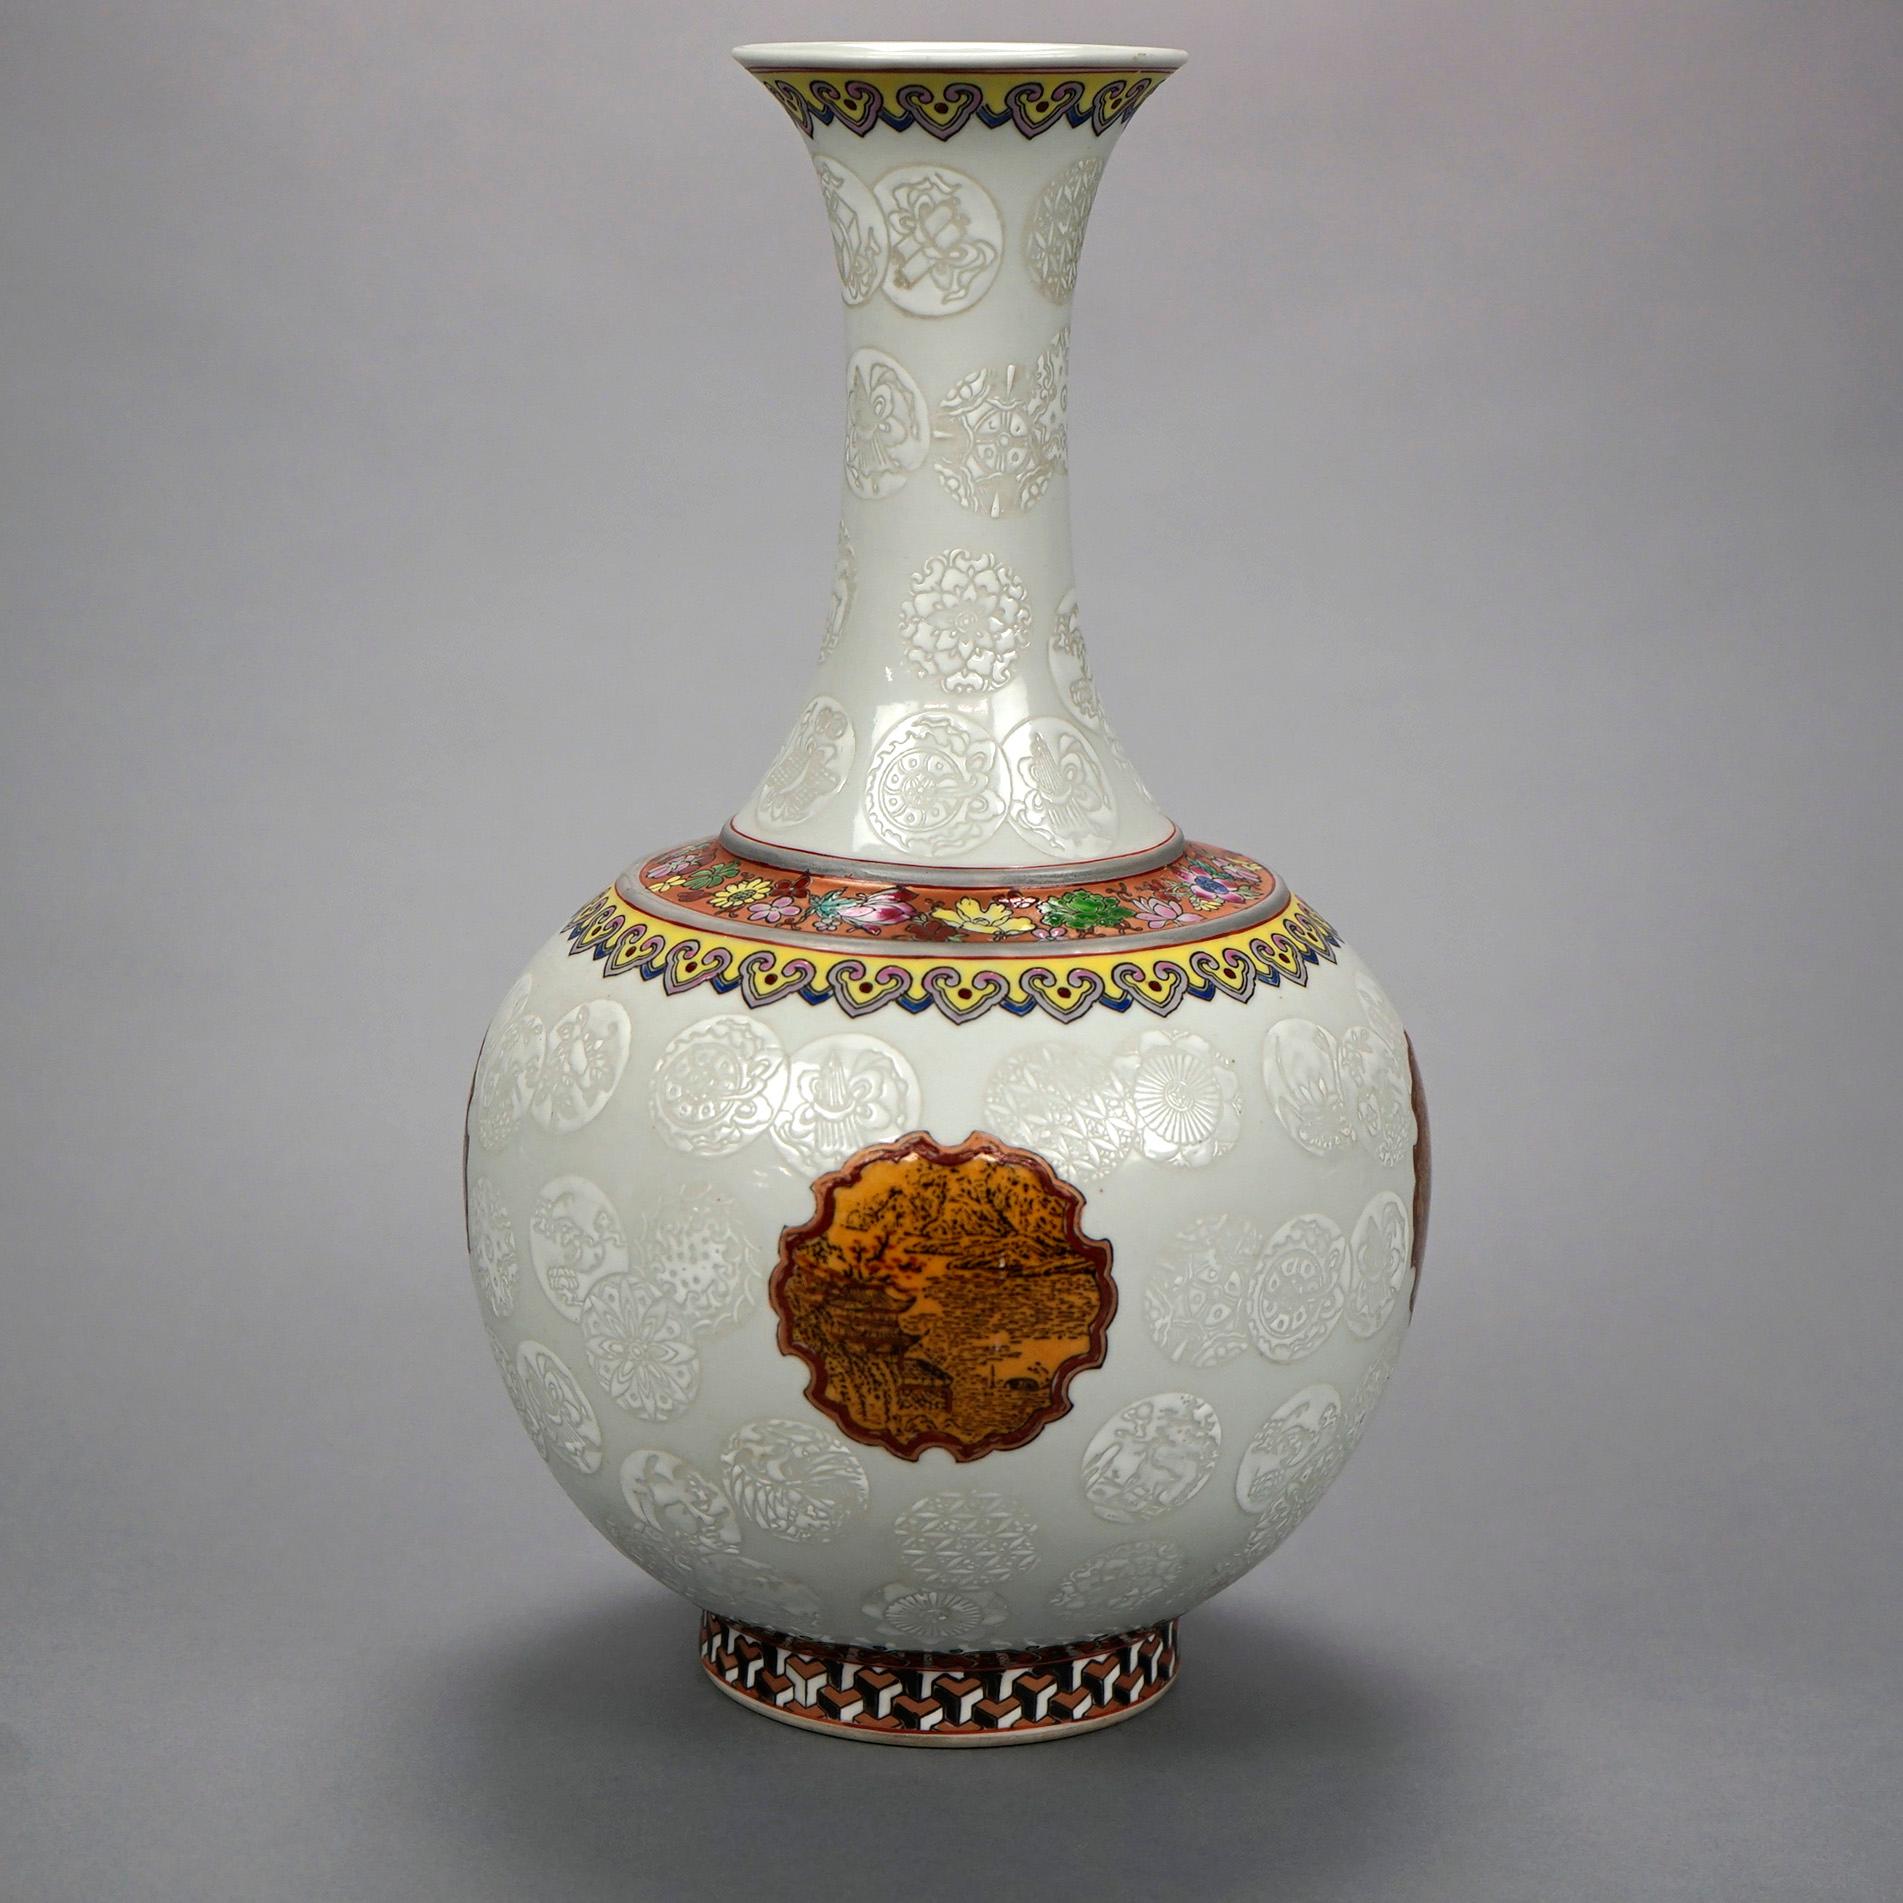 A Chinese vase offers embossed porcelain construction in bulbous form with hand enameled floral and collar decoration, stamped on base as photographed, 20th century

Measures- 13.25''H x 7.5''W x 7.5''D.